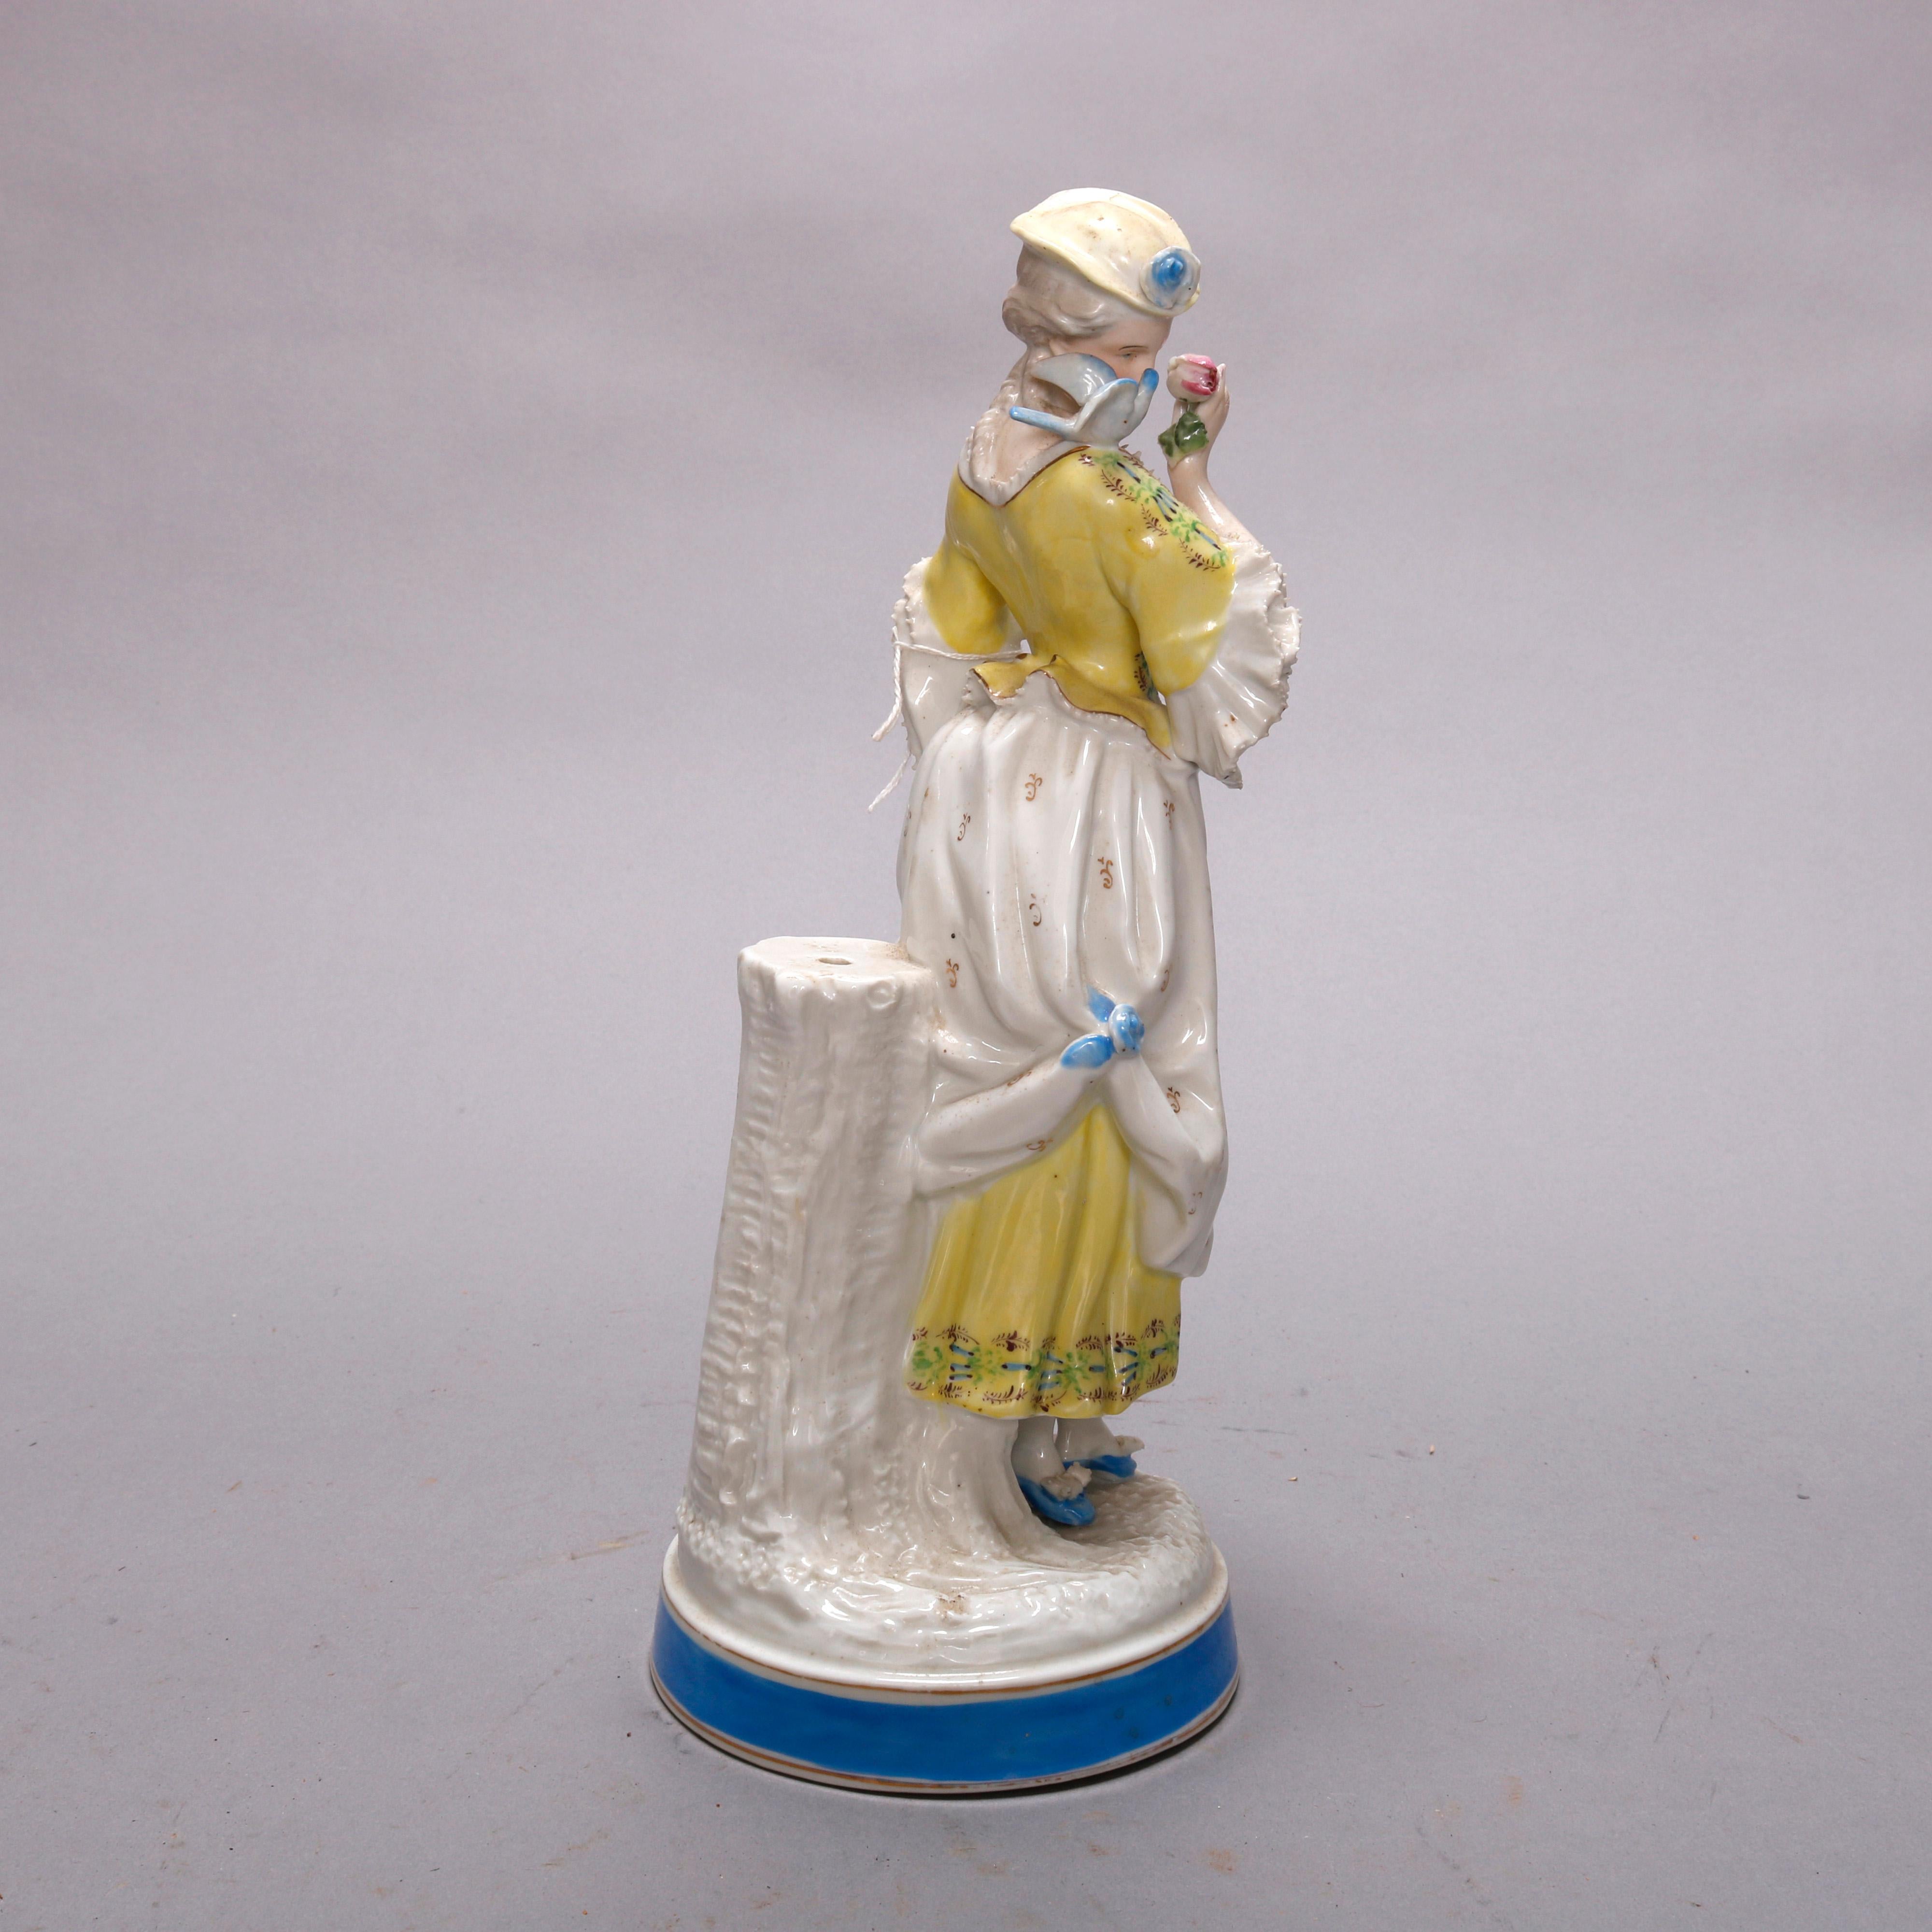 Antique German Hand Painted Porcelain Maiden Figure, Manner of Meissen, c1900 In Good Condition For Sale In Big Flats, NY